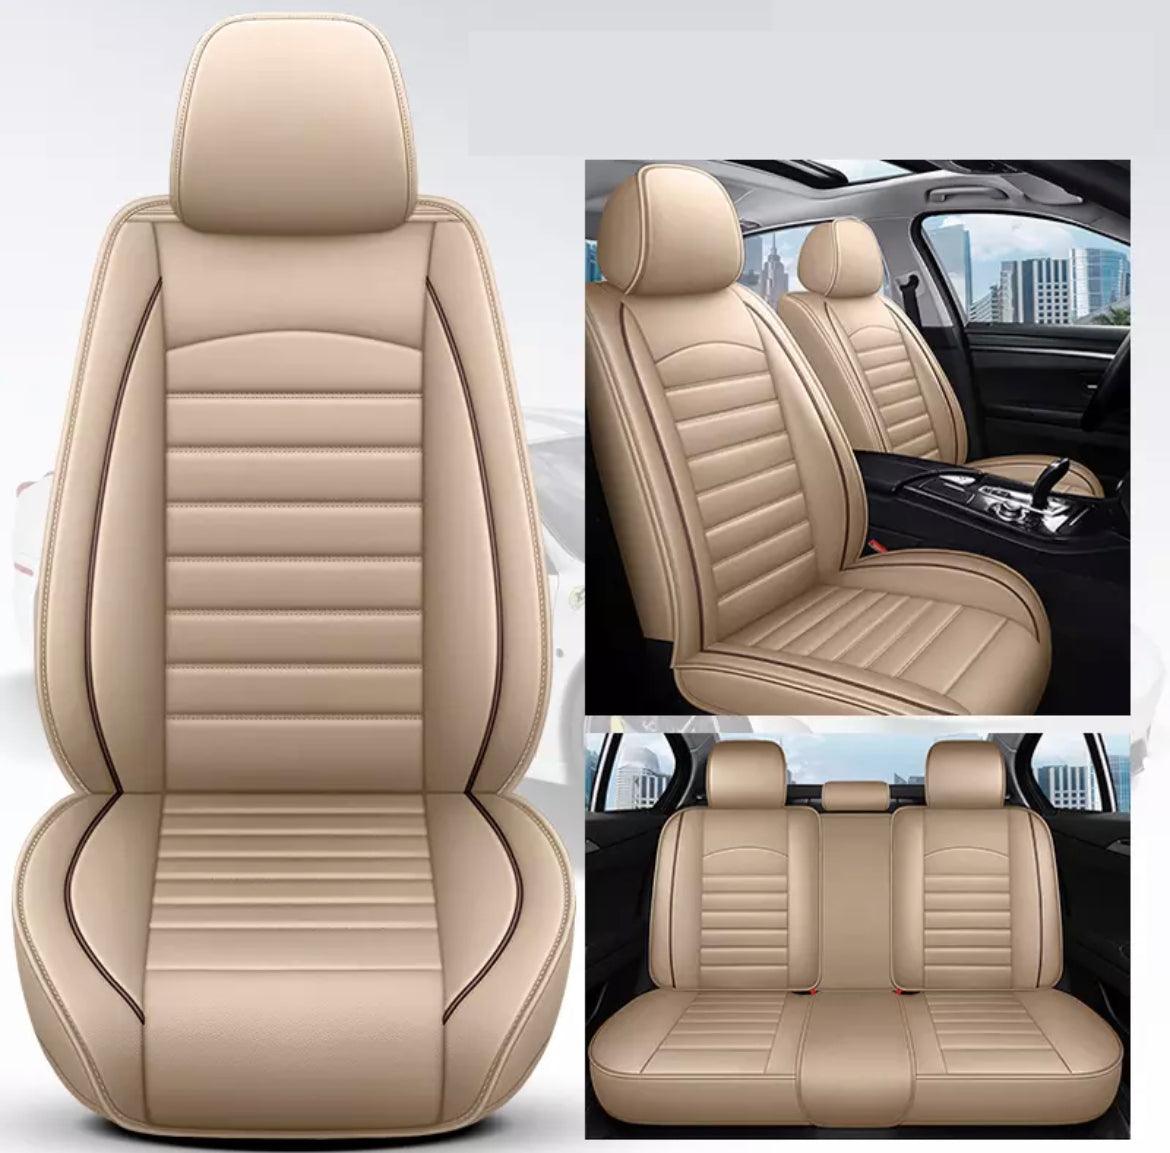 Custom Leather Seat Covers - The Right Buy